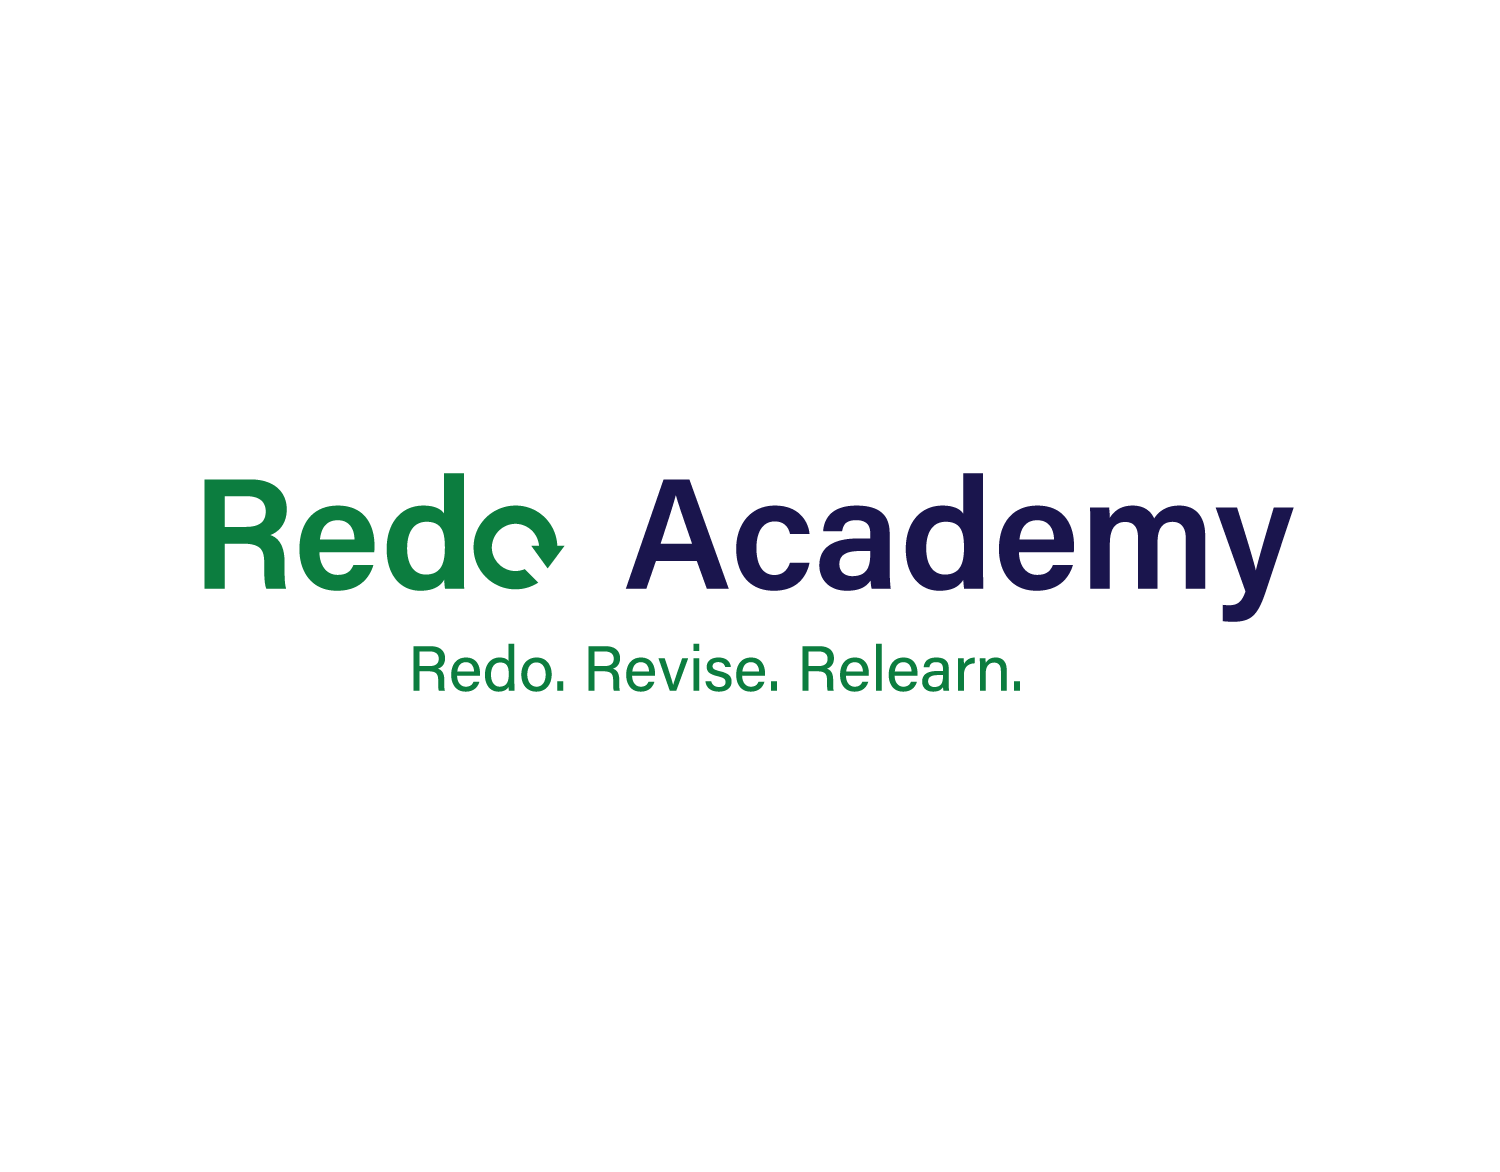 Redo Academy is the main phrase in this logo. Below it is a tagline
				which reads Redo. Revise. Relearn. The O in Redo is stylized into an arrow
				circling itself, and everything is colored green except the word Academy. 
				Academy's color is a dark shade of blue.